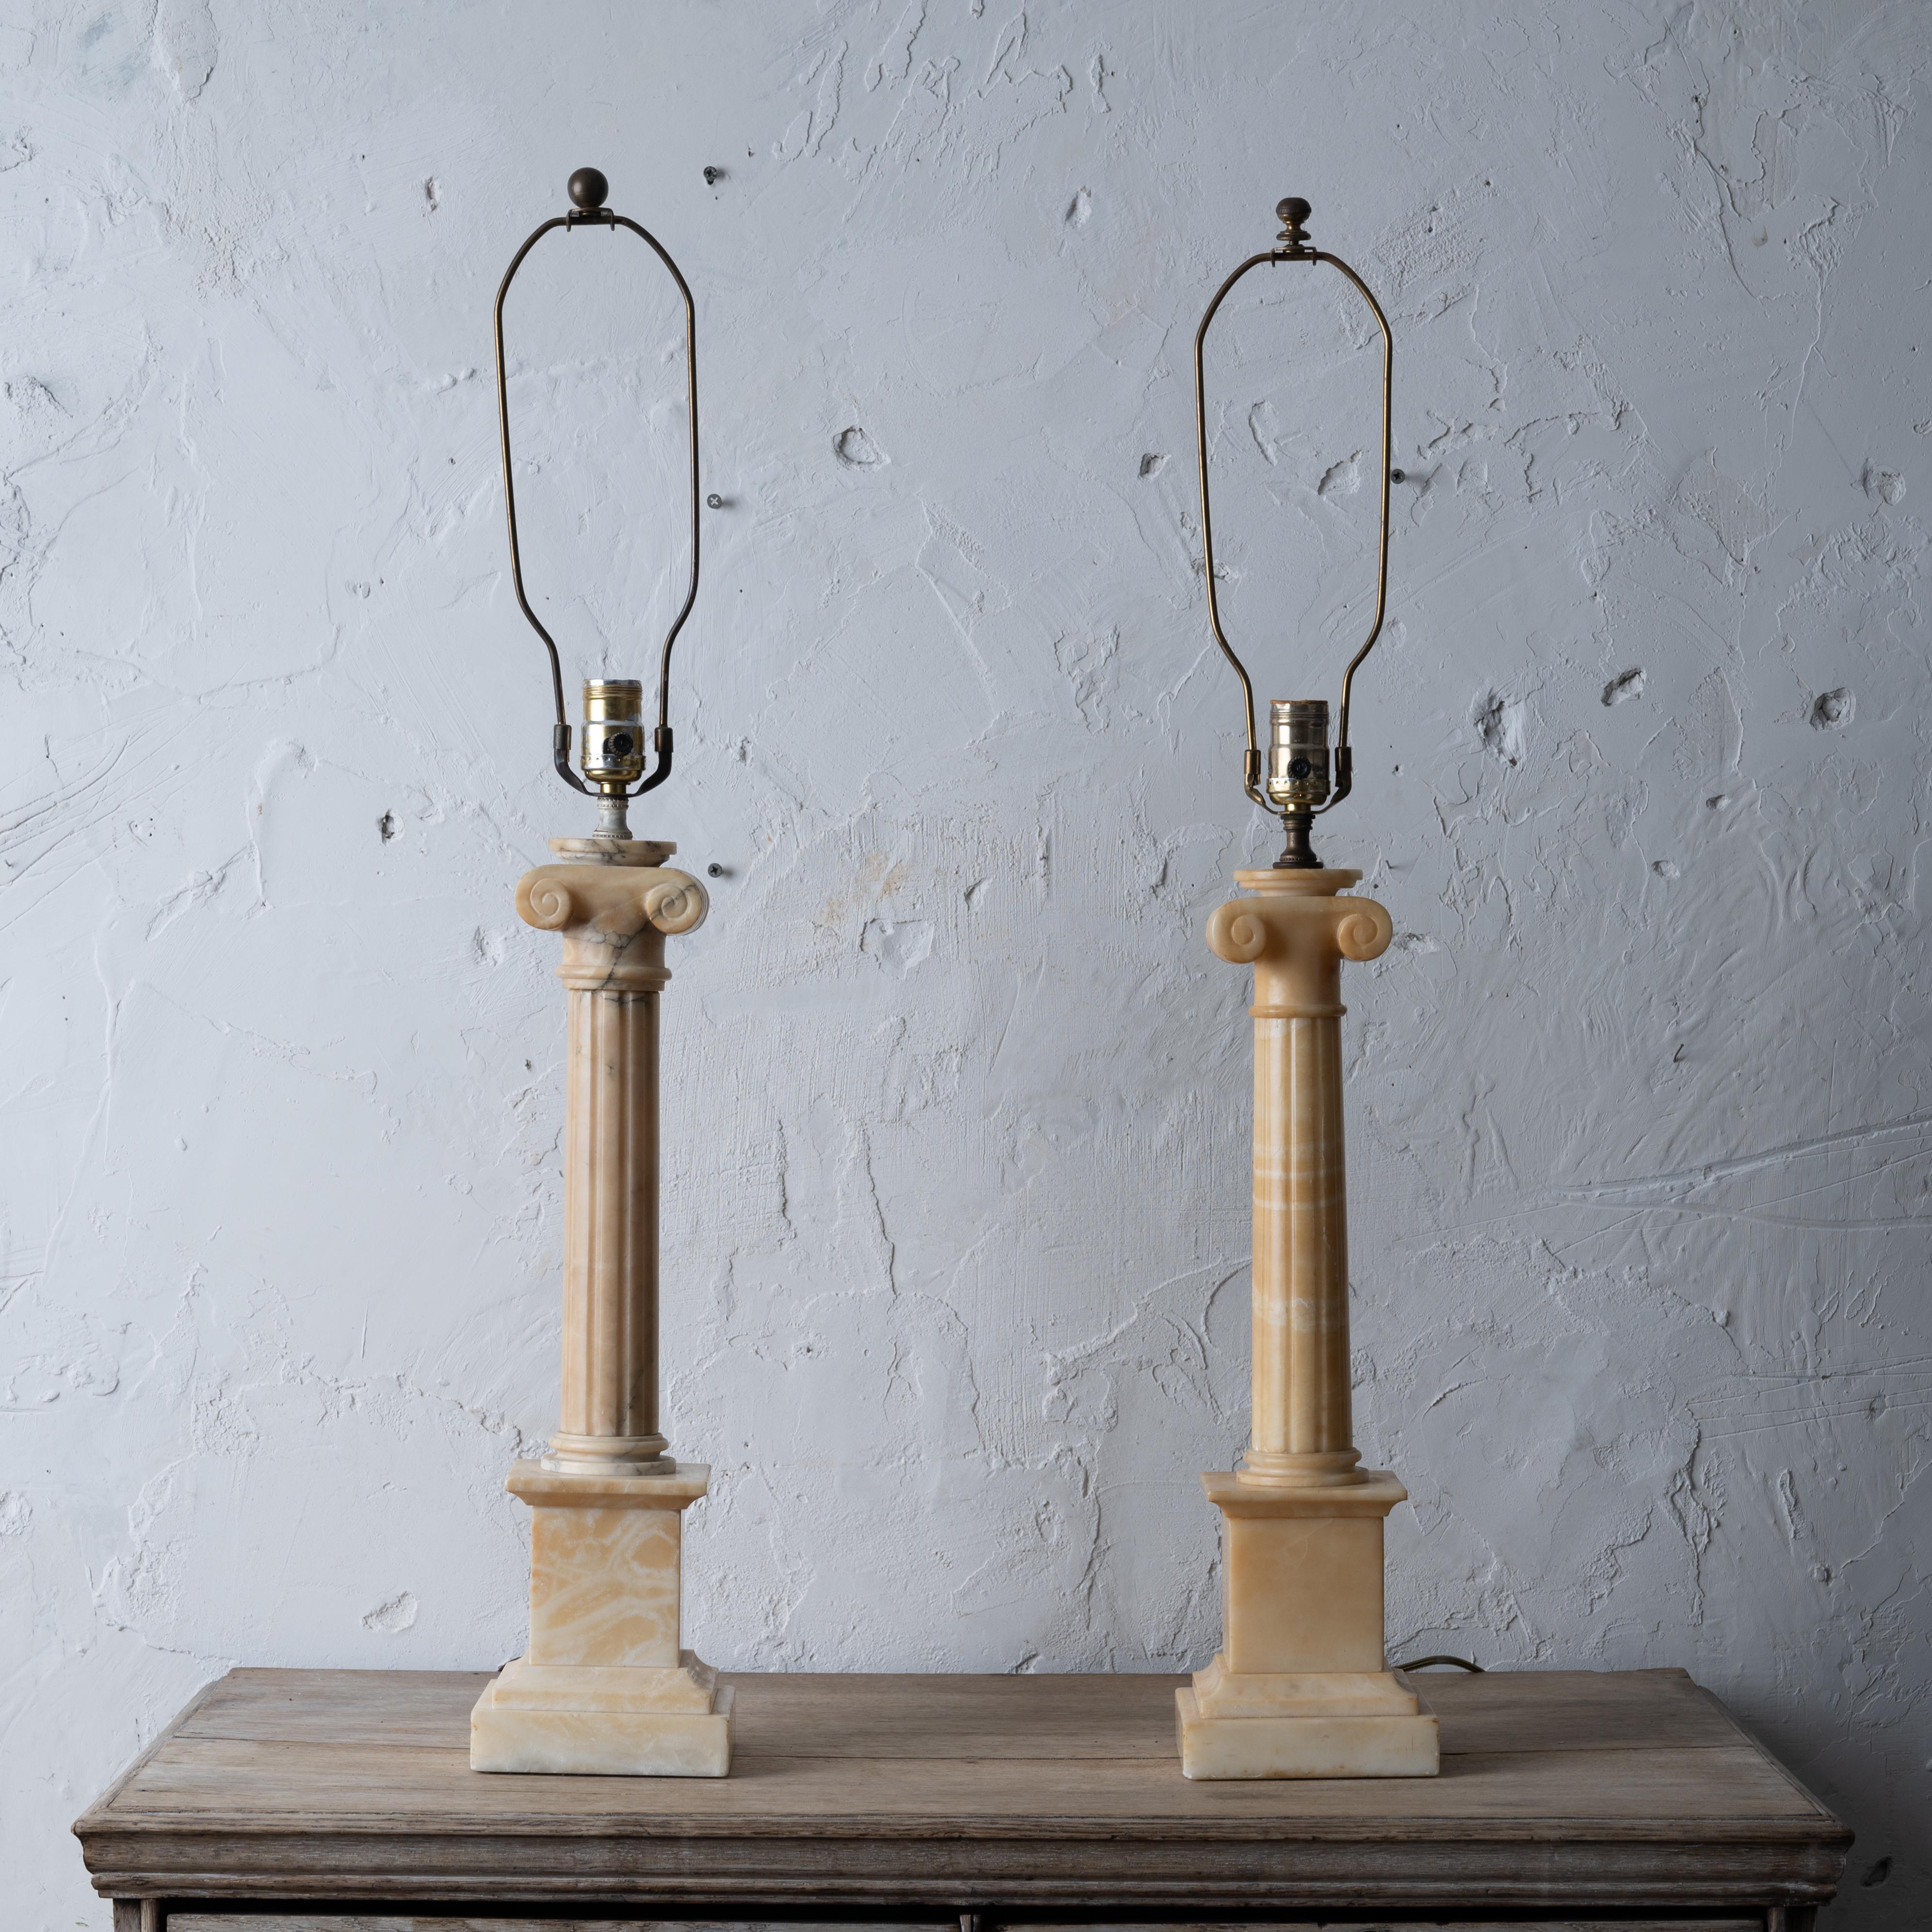 A pair of Italian alabaster table lamps, mid 20th century.
Columnar-form with tapering fluted columns on round feet with ionic capitals, elevated by square plinths.

5 ½ inches wide by 20 inches tall (top of alabaster); total height: 33 ¼ inches